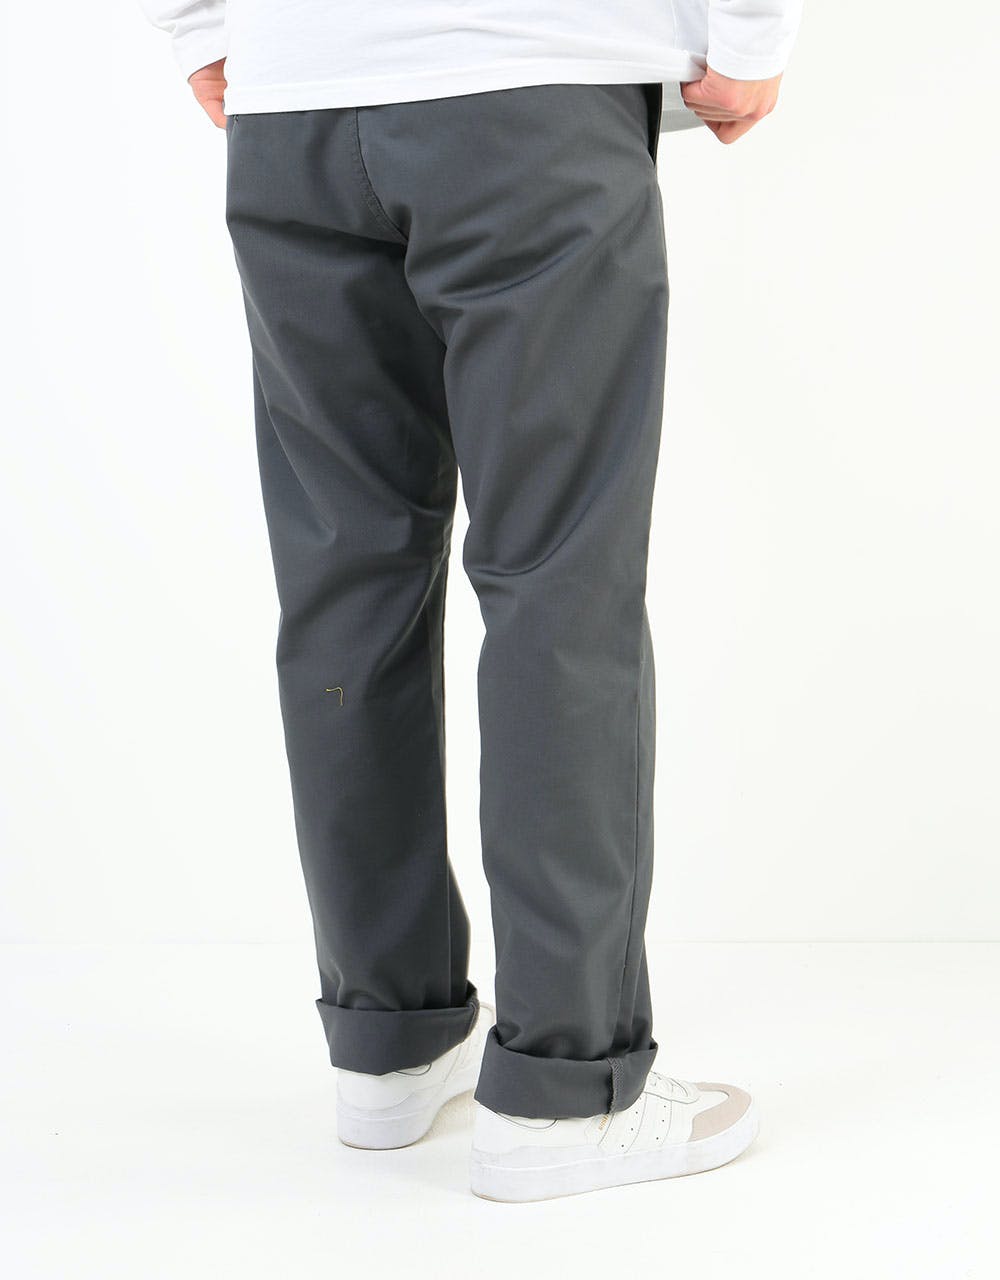 Carhartt WIP Station Pant - Blacksmith (Rinsed) – Route One